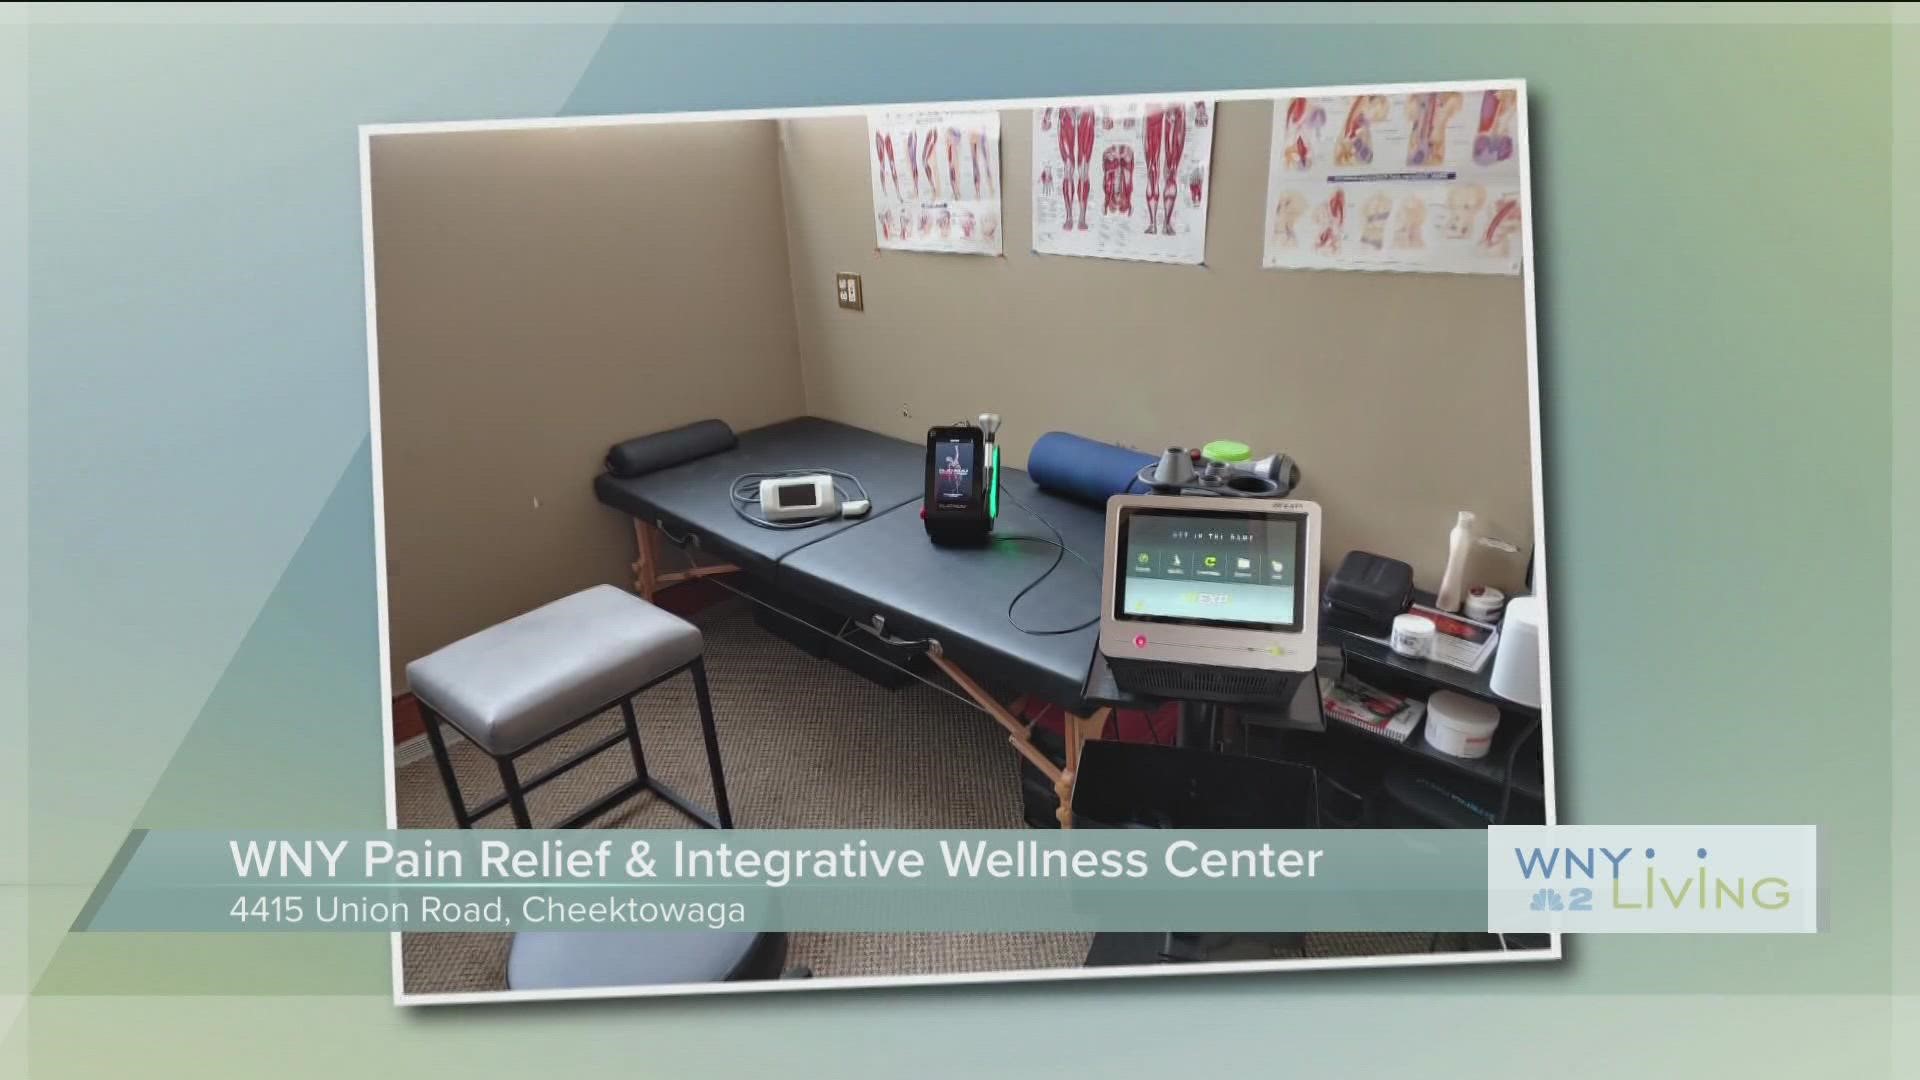 WNY Living - January 7 - WNY Pain Relief & Integrative Wellness Center (THIS VIDEO IS SPONSORED BY WNY PAIN RELIEF & INTEGRATIVE WELLNESS CENTER)